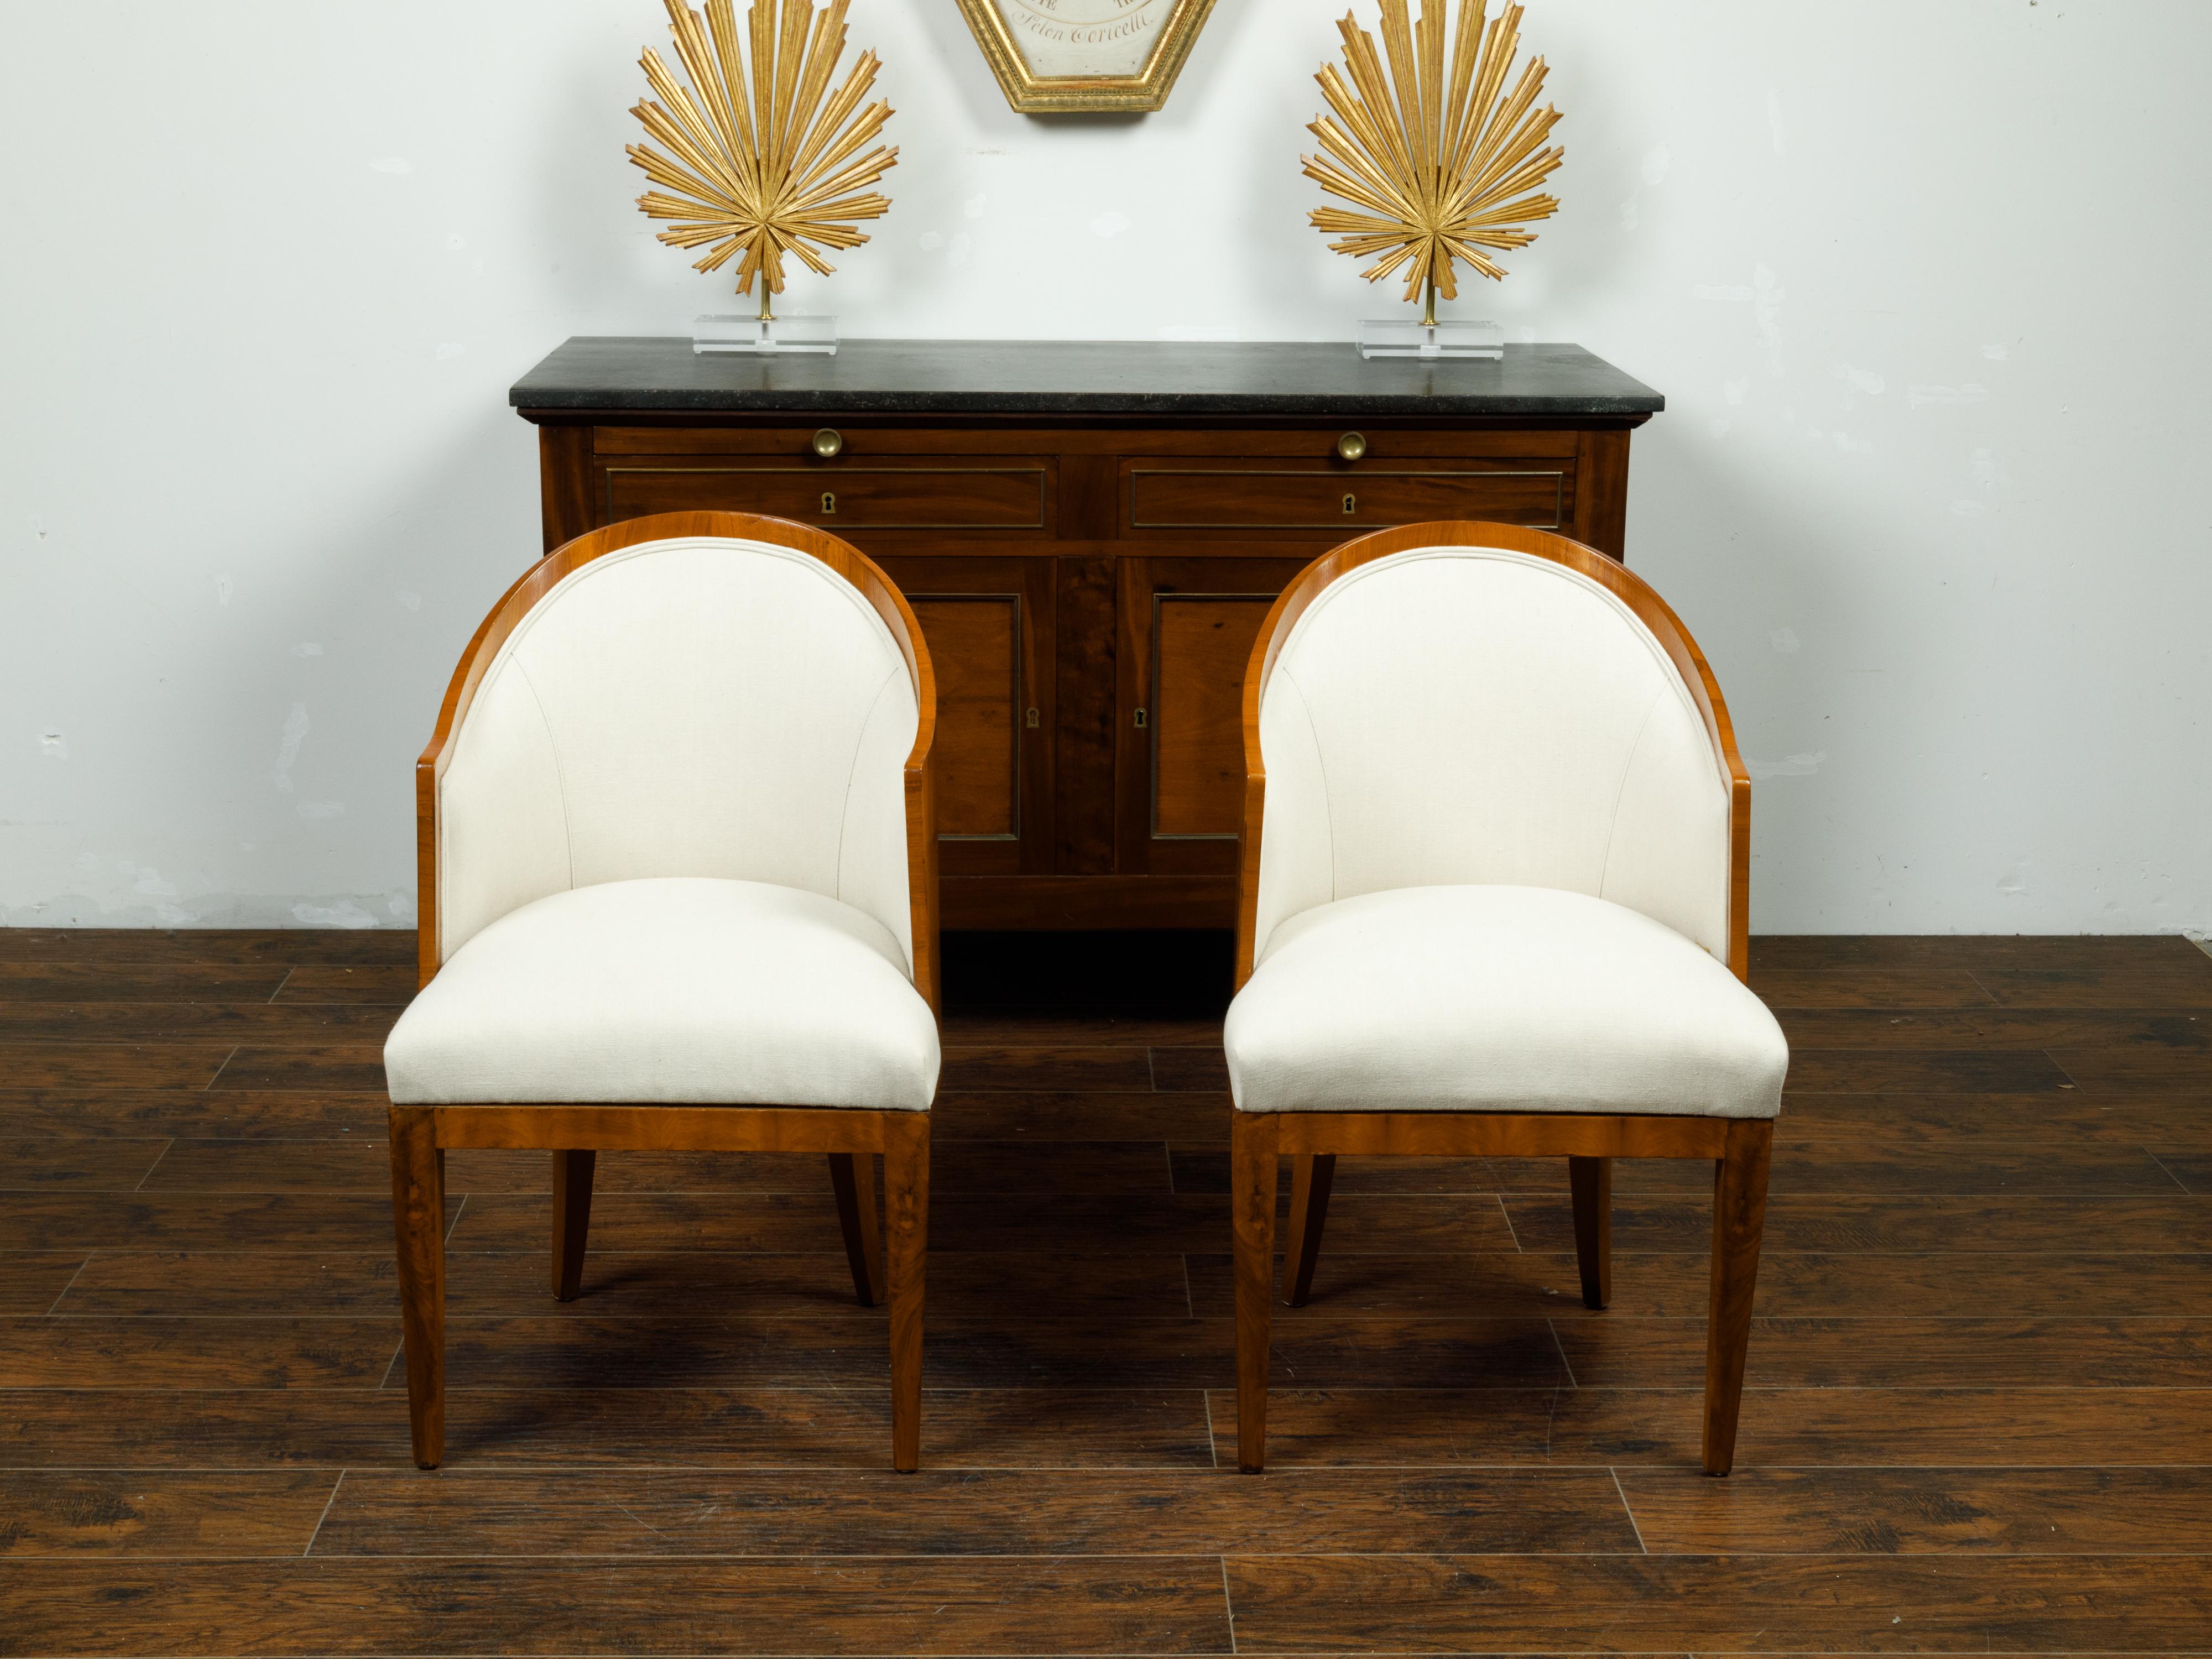 A pair of Austrian Biedermeier period walnut wraparound back armchairs from the mid 19th century, with tapered legs and new upholstery. Created in Austria during the second quarter of the 19th century, each of this pair of Biedermeier chairs